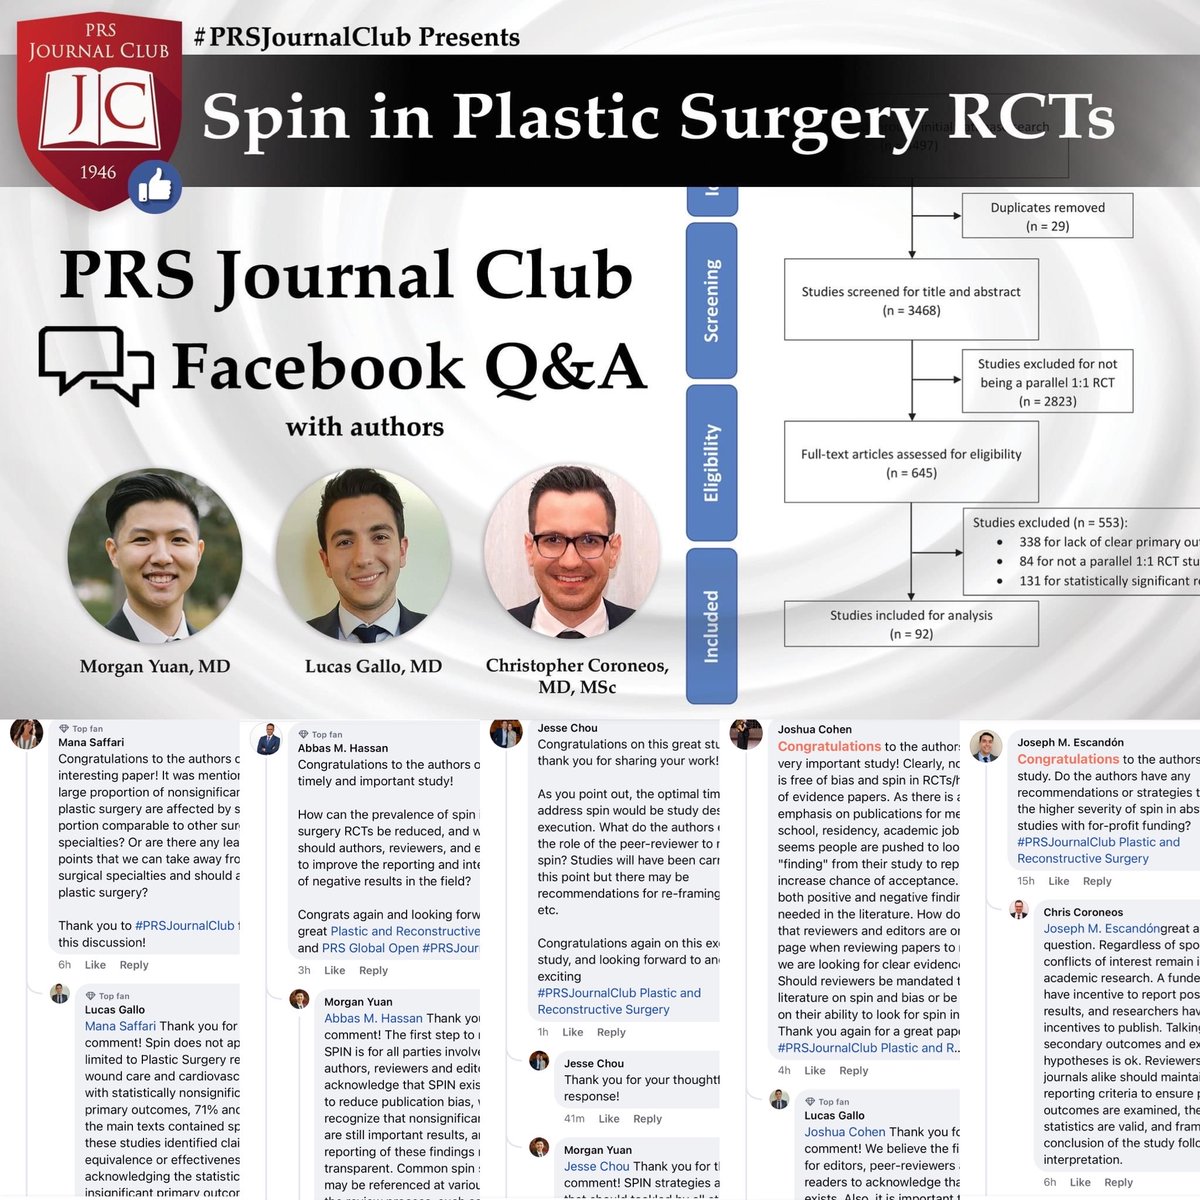 #PRSJournalClub Facebook Q&A is about to end, don’t wait, ask your questions before it’s too late!

Click the link and ask your questions today! bit.ly/JCMarch23FB_Po…

Thank you to everyone who has joined this great discussion!